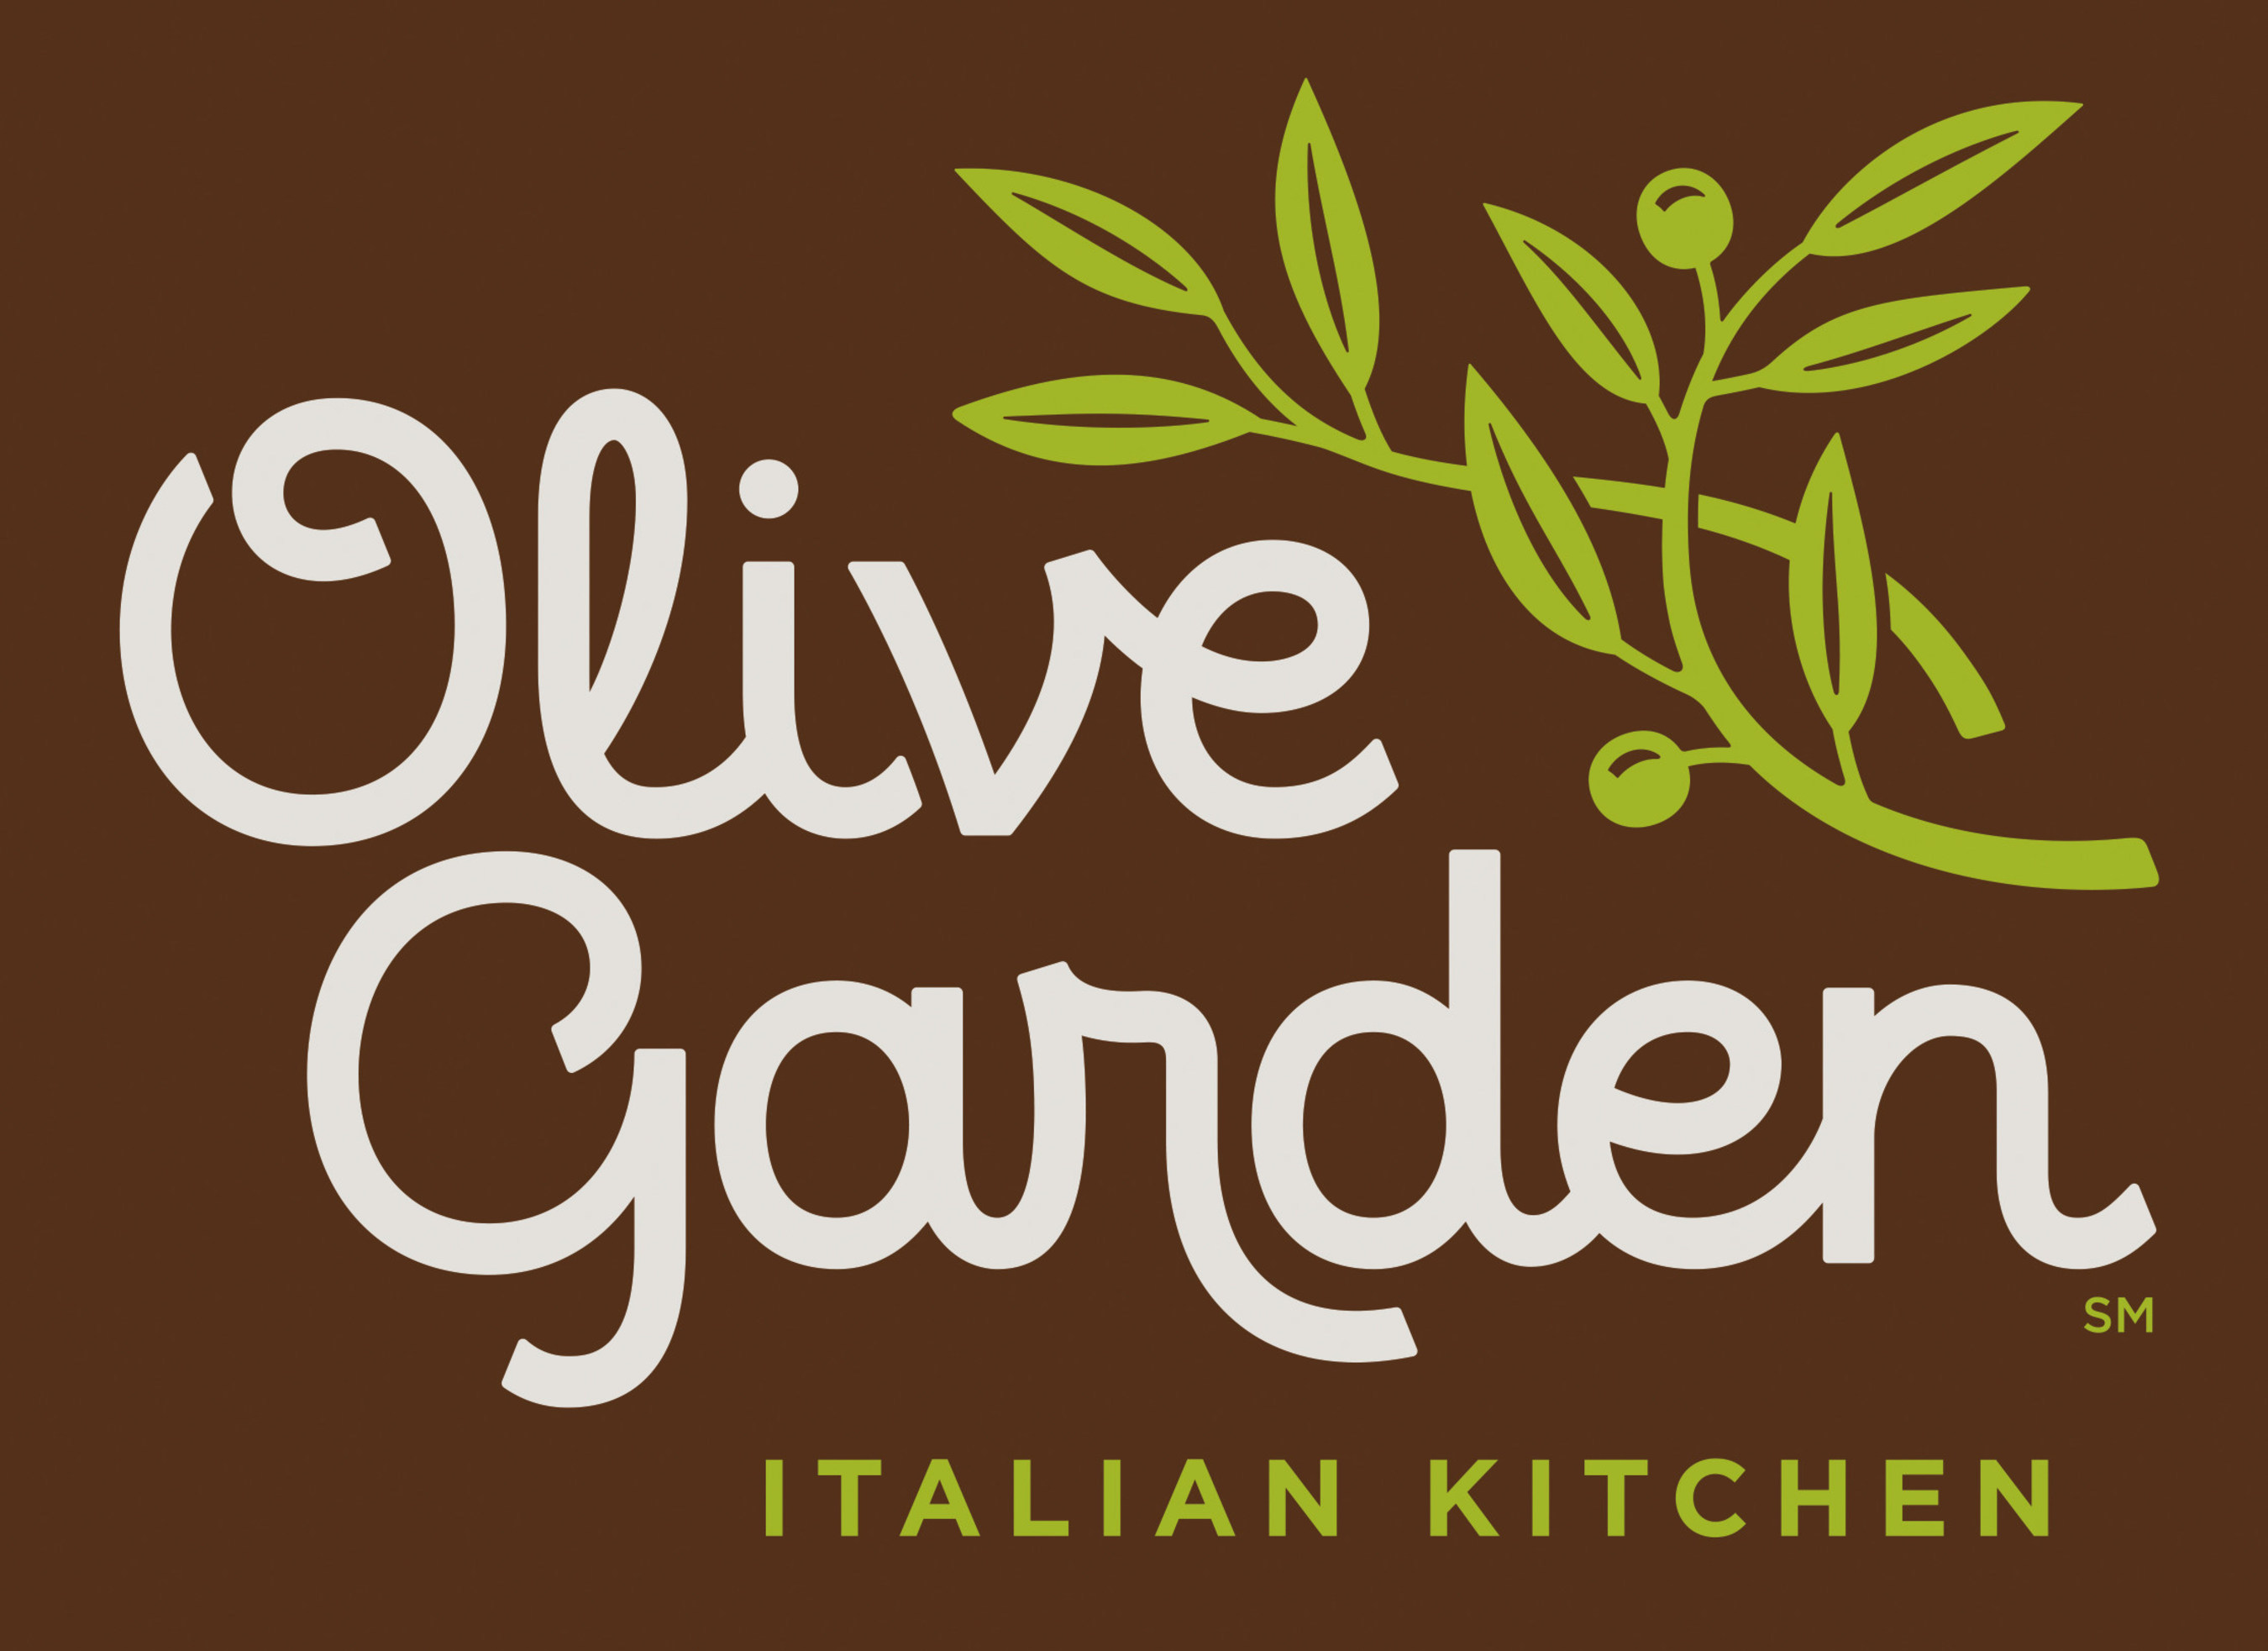 Olive Garden Teams Up With Feeding America To Feed Families In Need